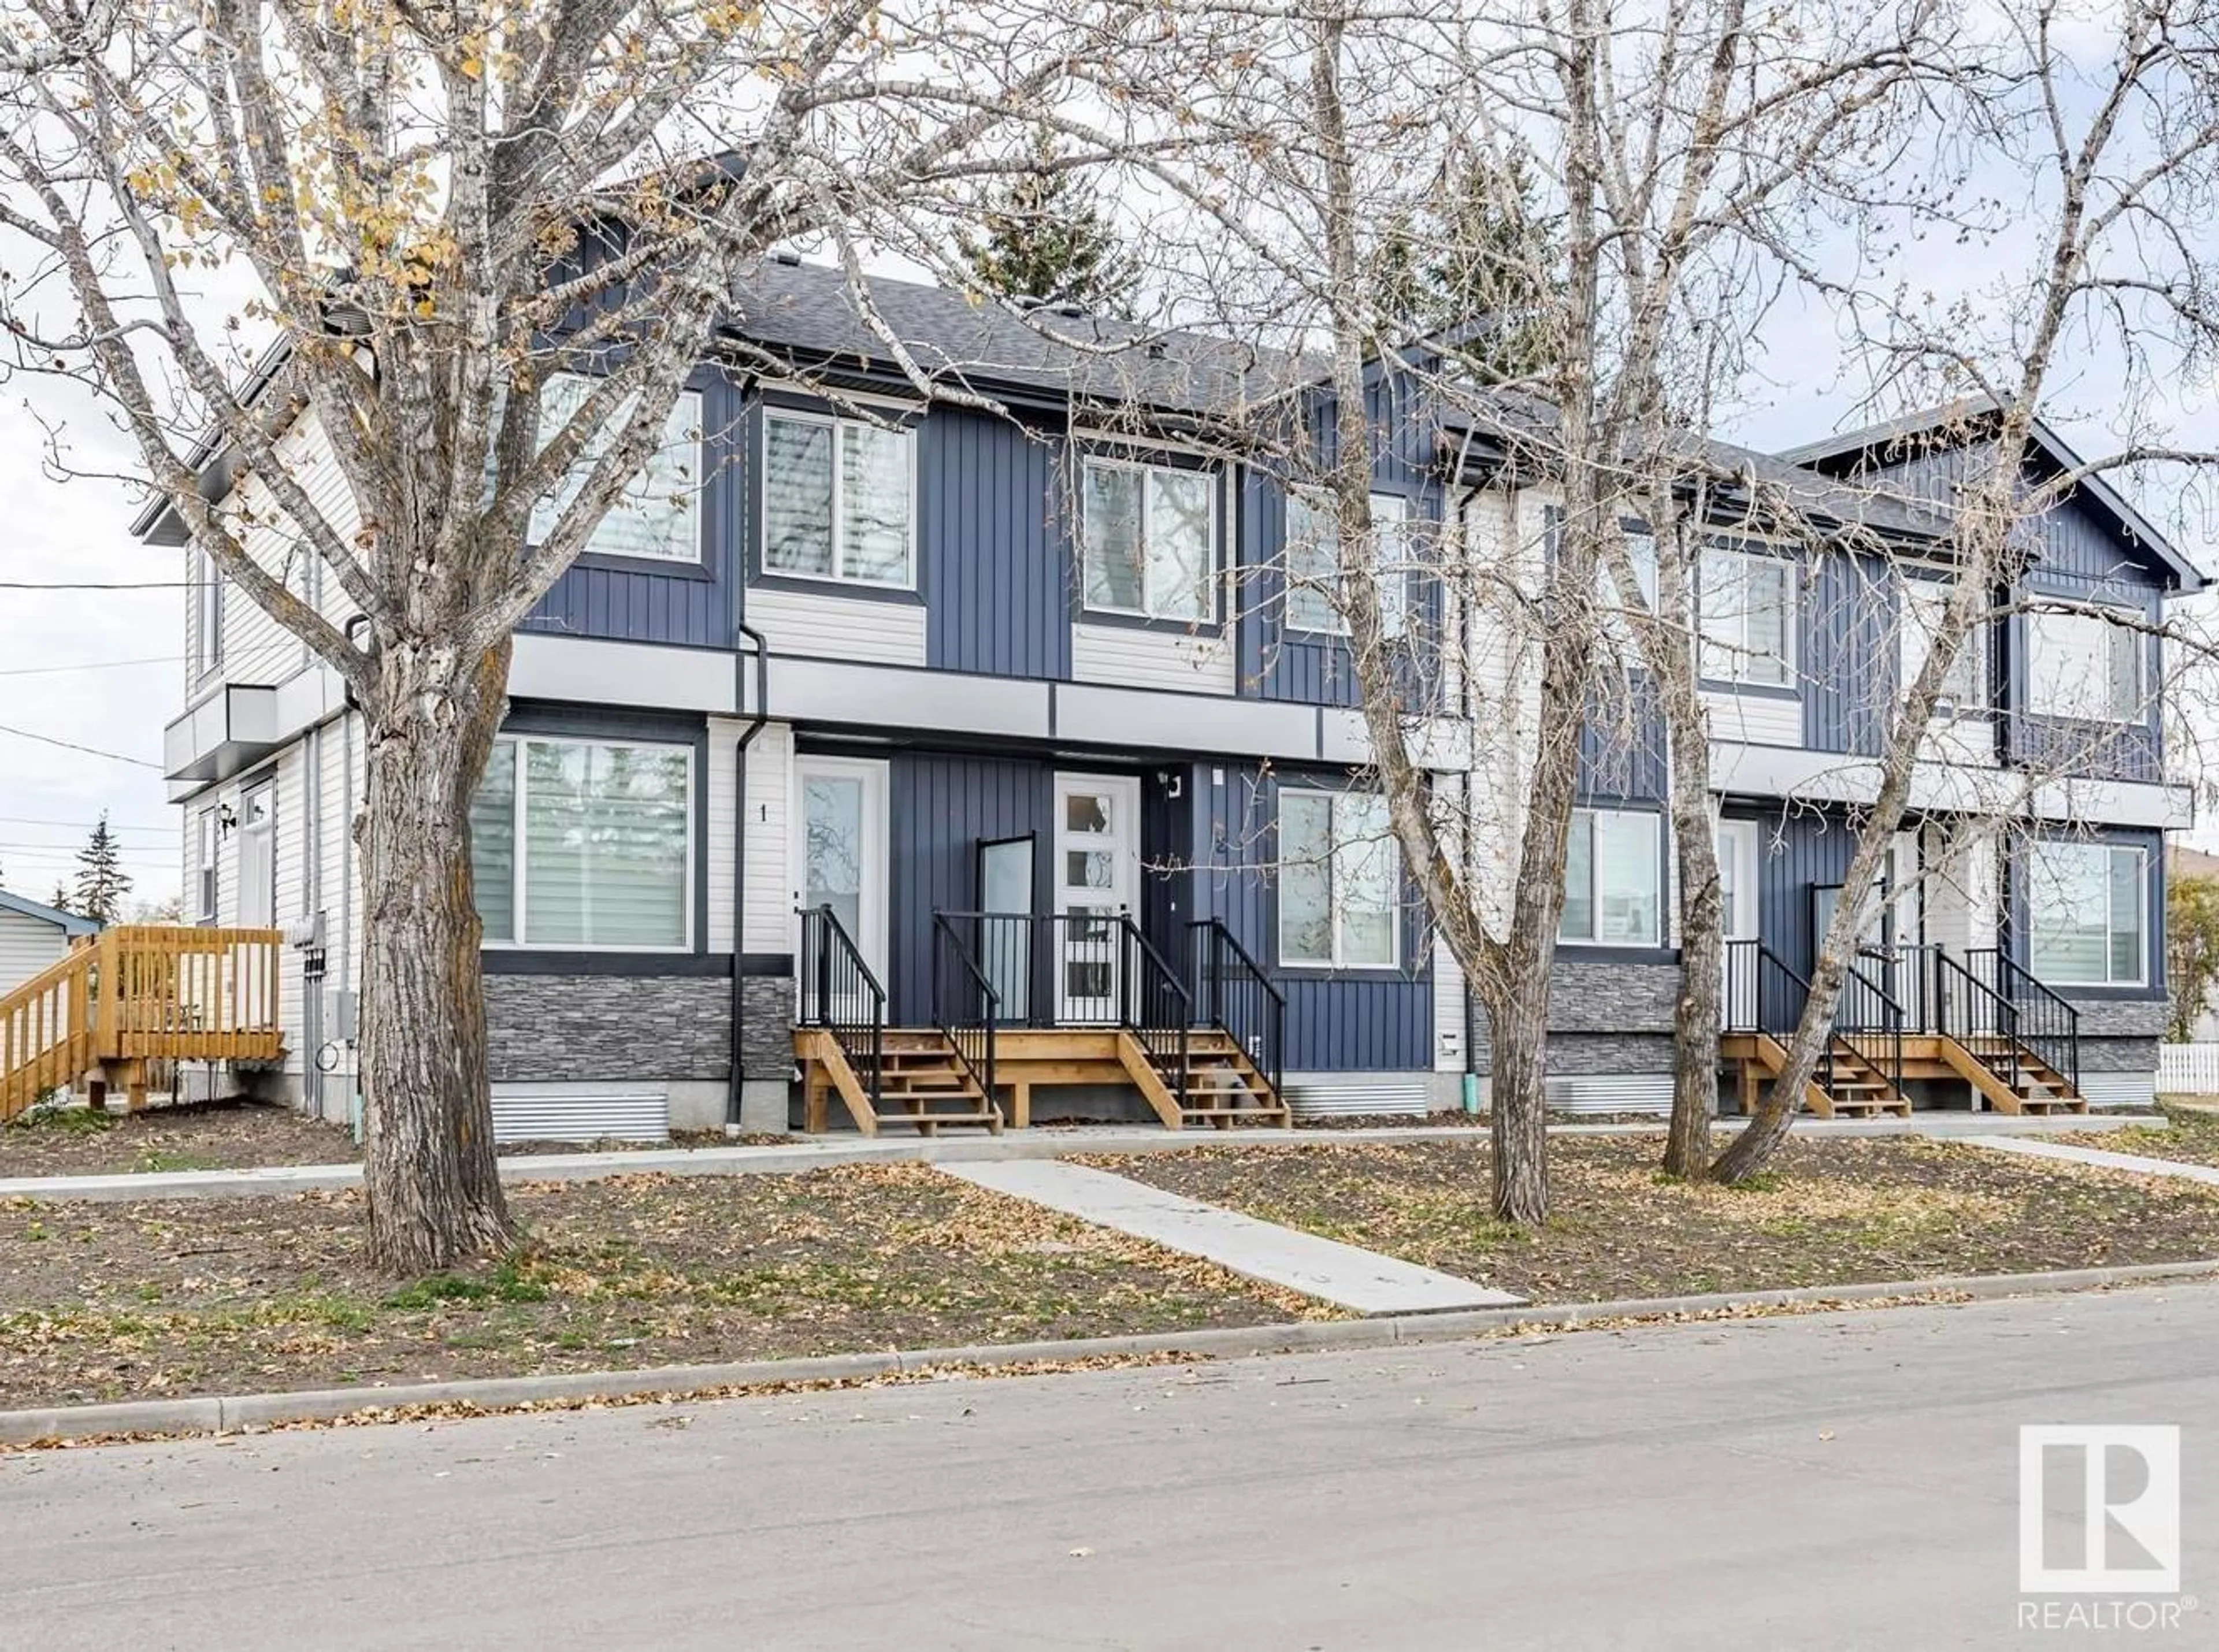 A pic from exterior of the house or condo for 10008 162 ST NW, Edmonton Alberta T5P0M2